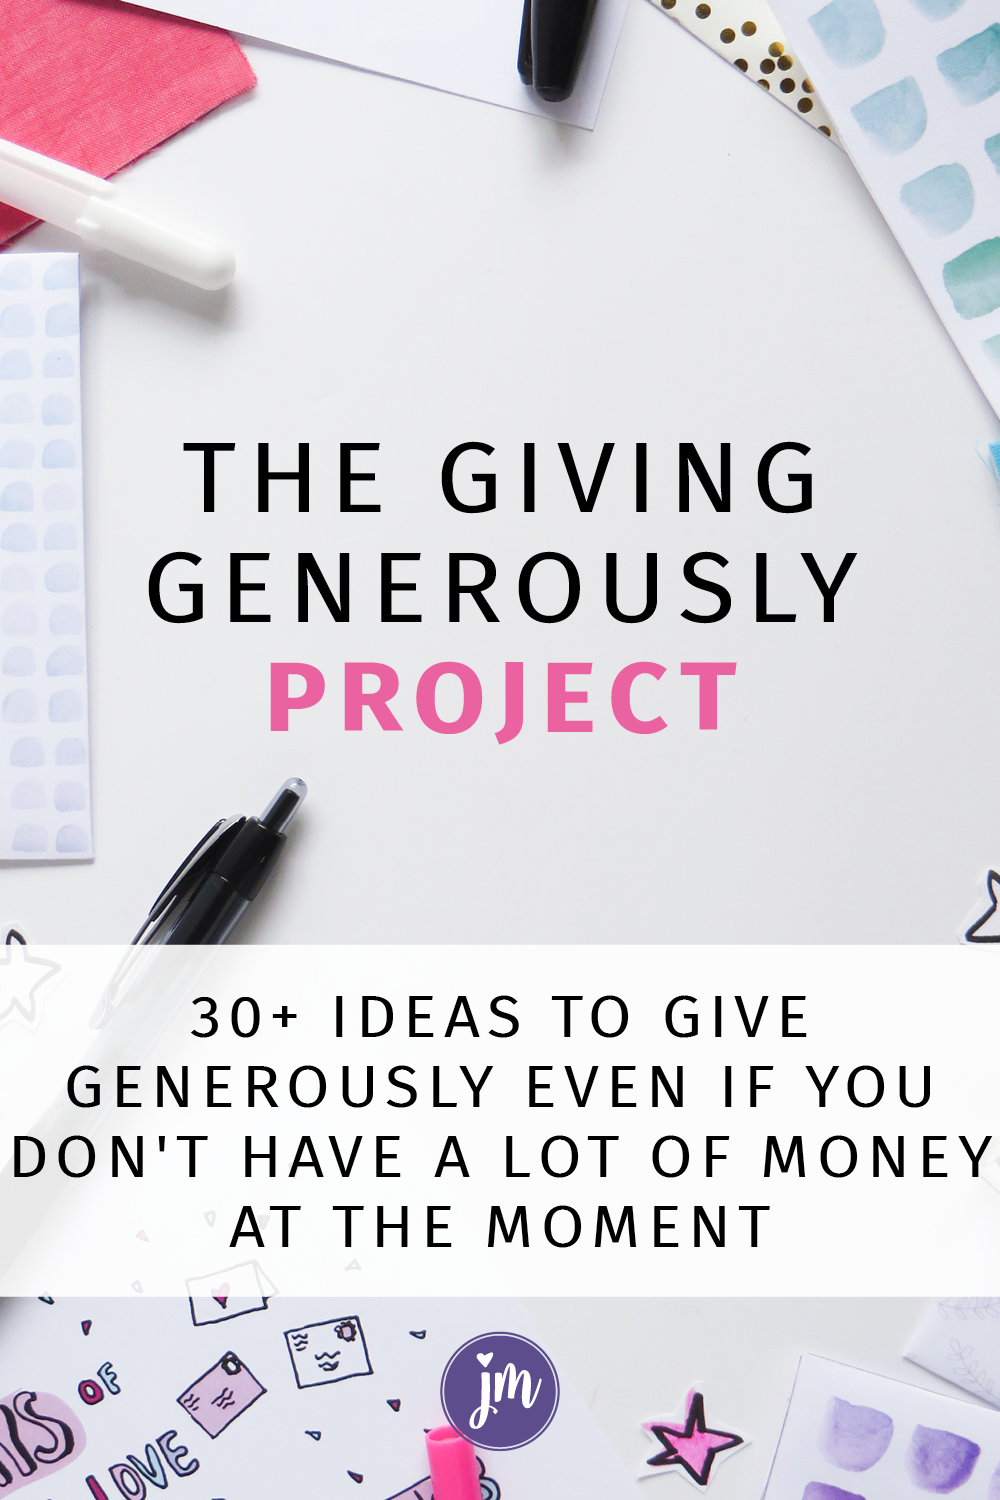 Get 30+ ideas of how to give generously even when you don't have a lot of money at the moment. I love this so much. I'm using this gift guide this year for Christmas!